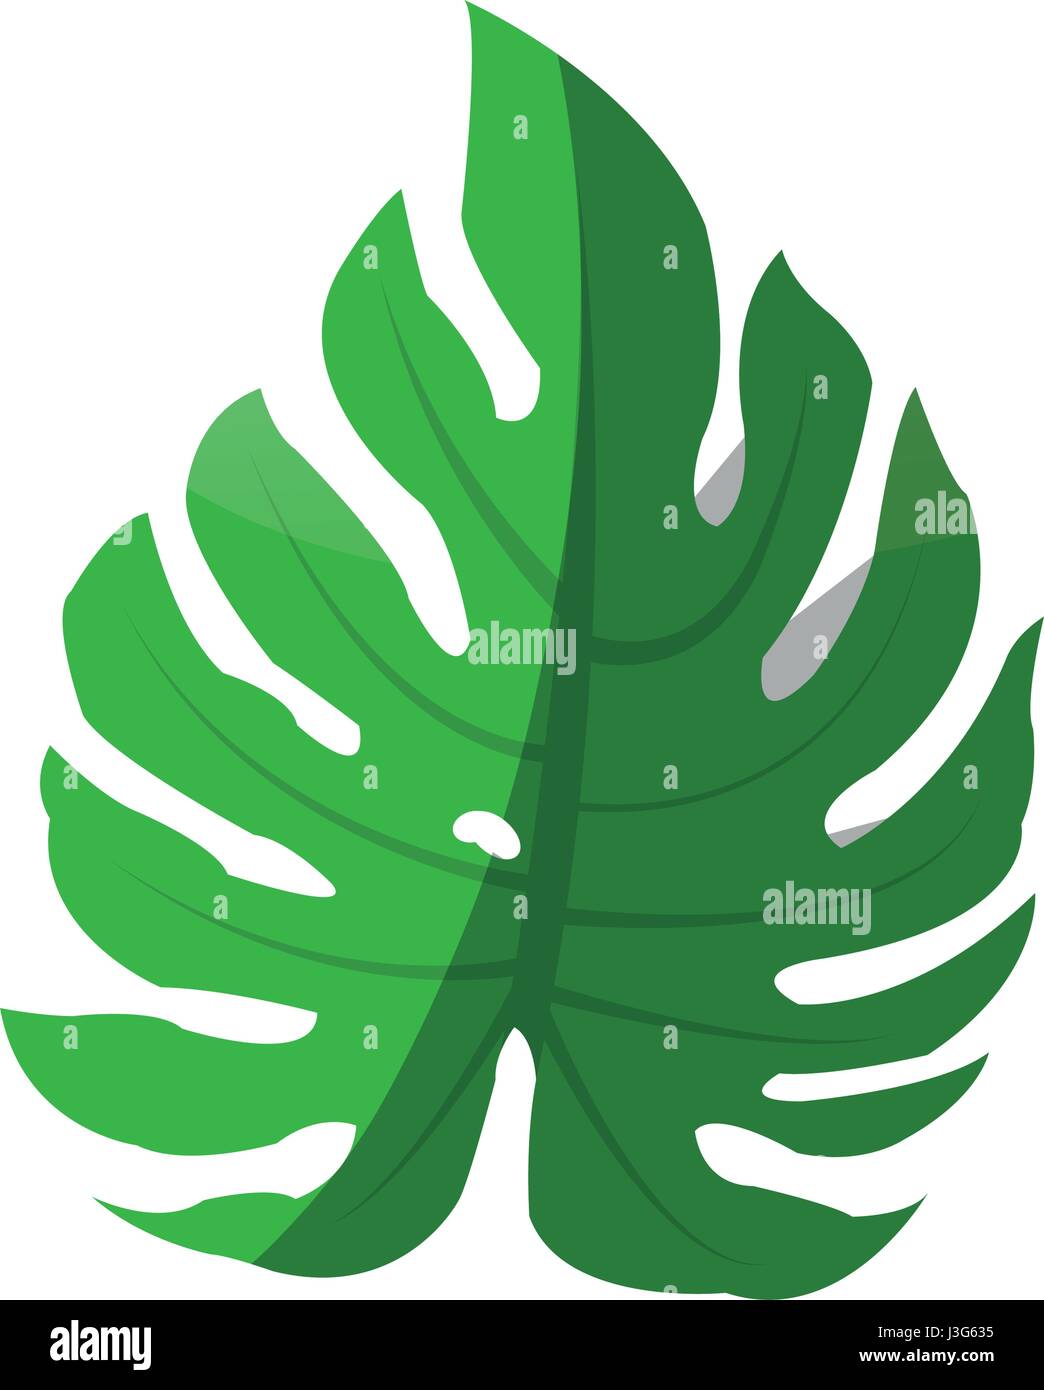 green textured leaf icon image Stock Vector